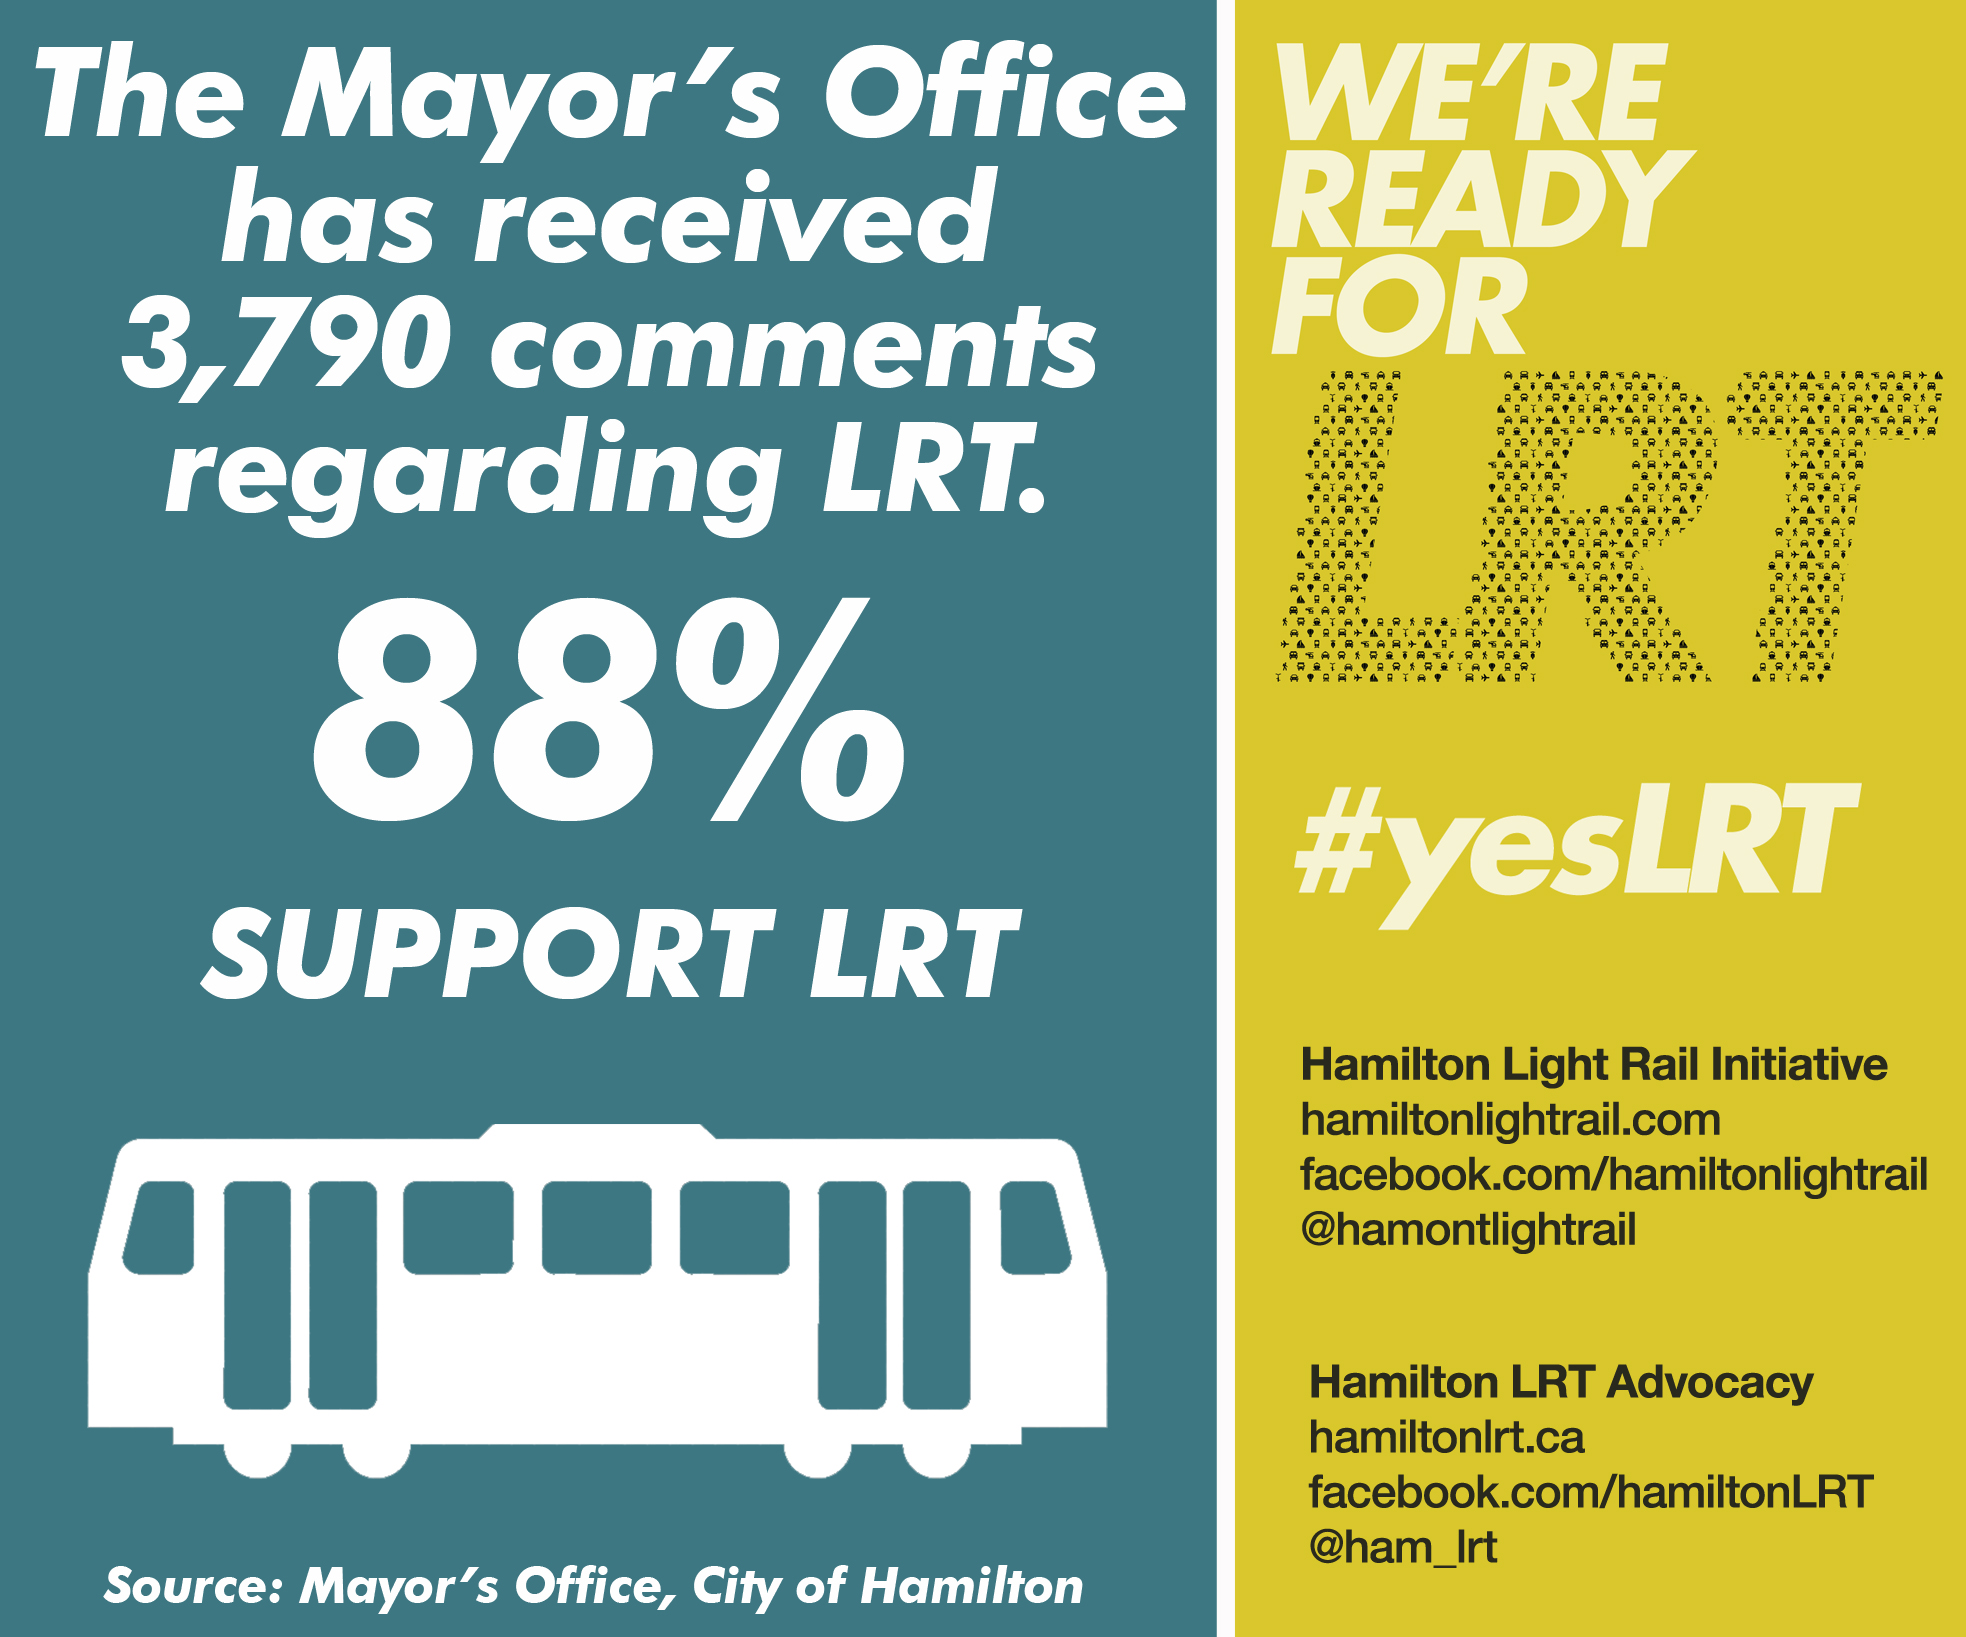 The Mayor's office has received 3,790 comments regarding LRT and 88% are in support